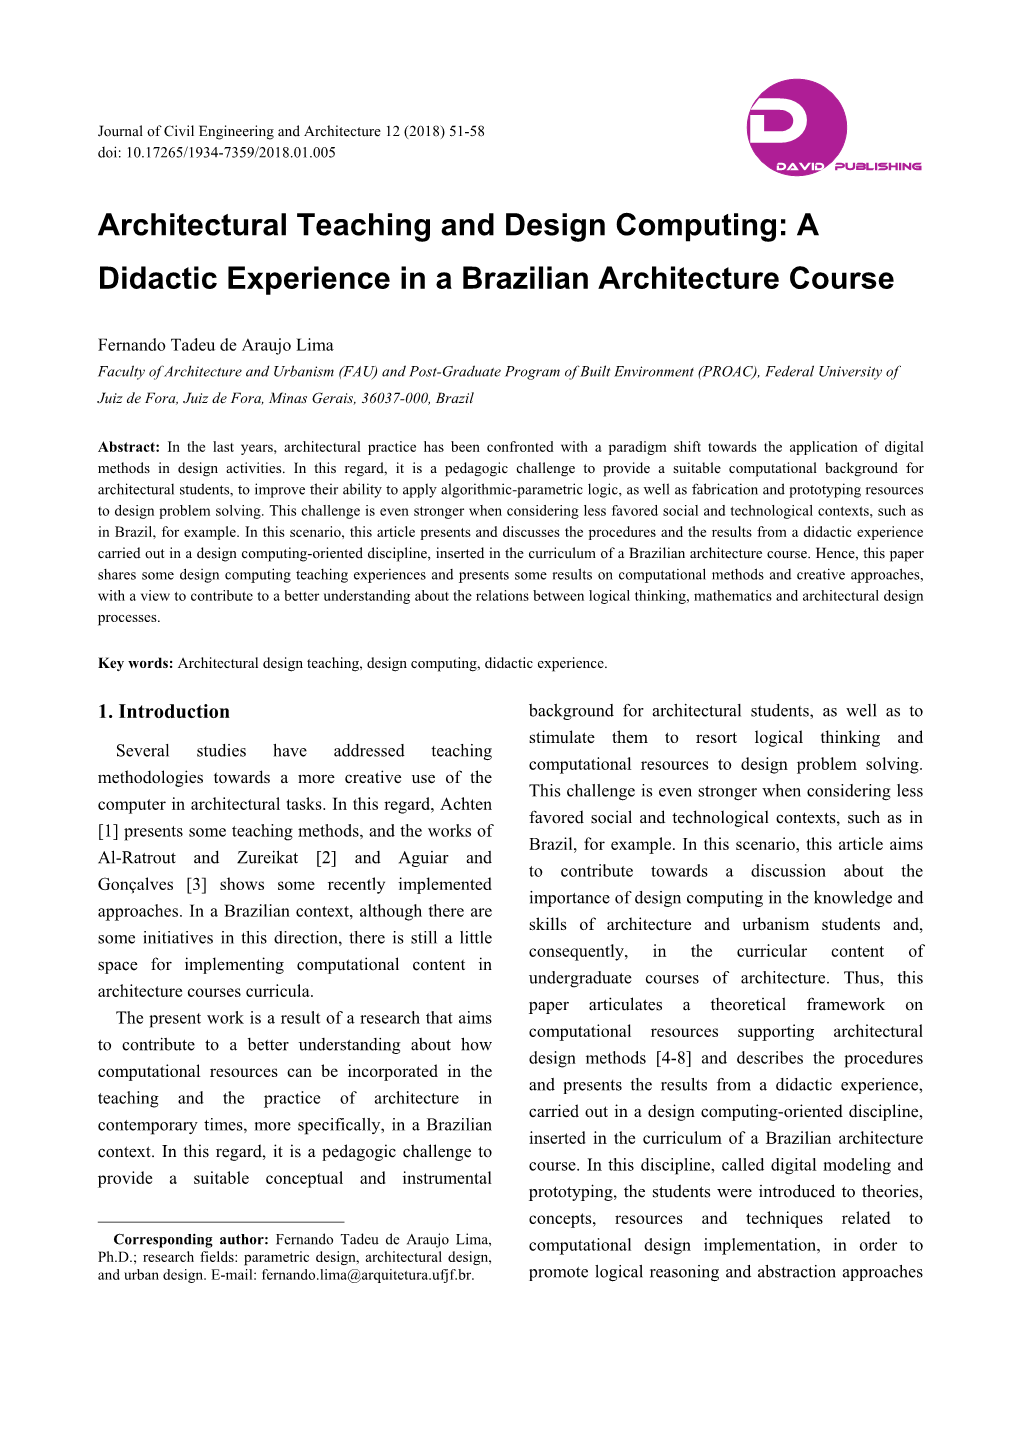 Architectural Teaching and Design Computing: a Didactic Experience in a Brazilian Architecture Course